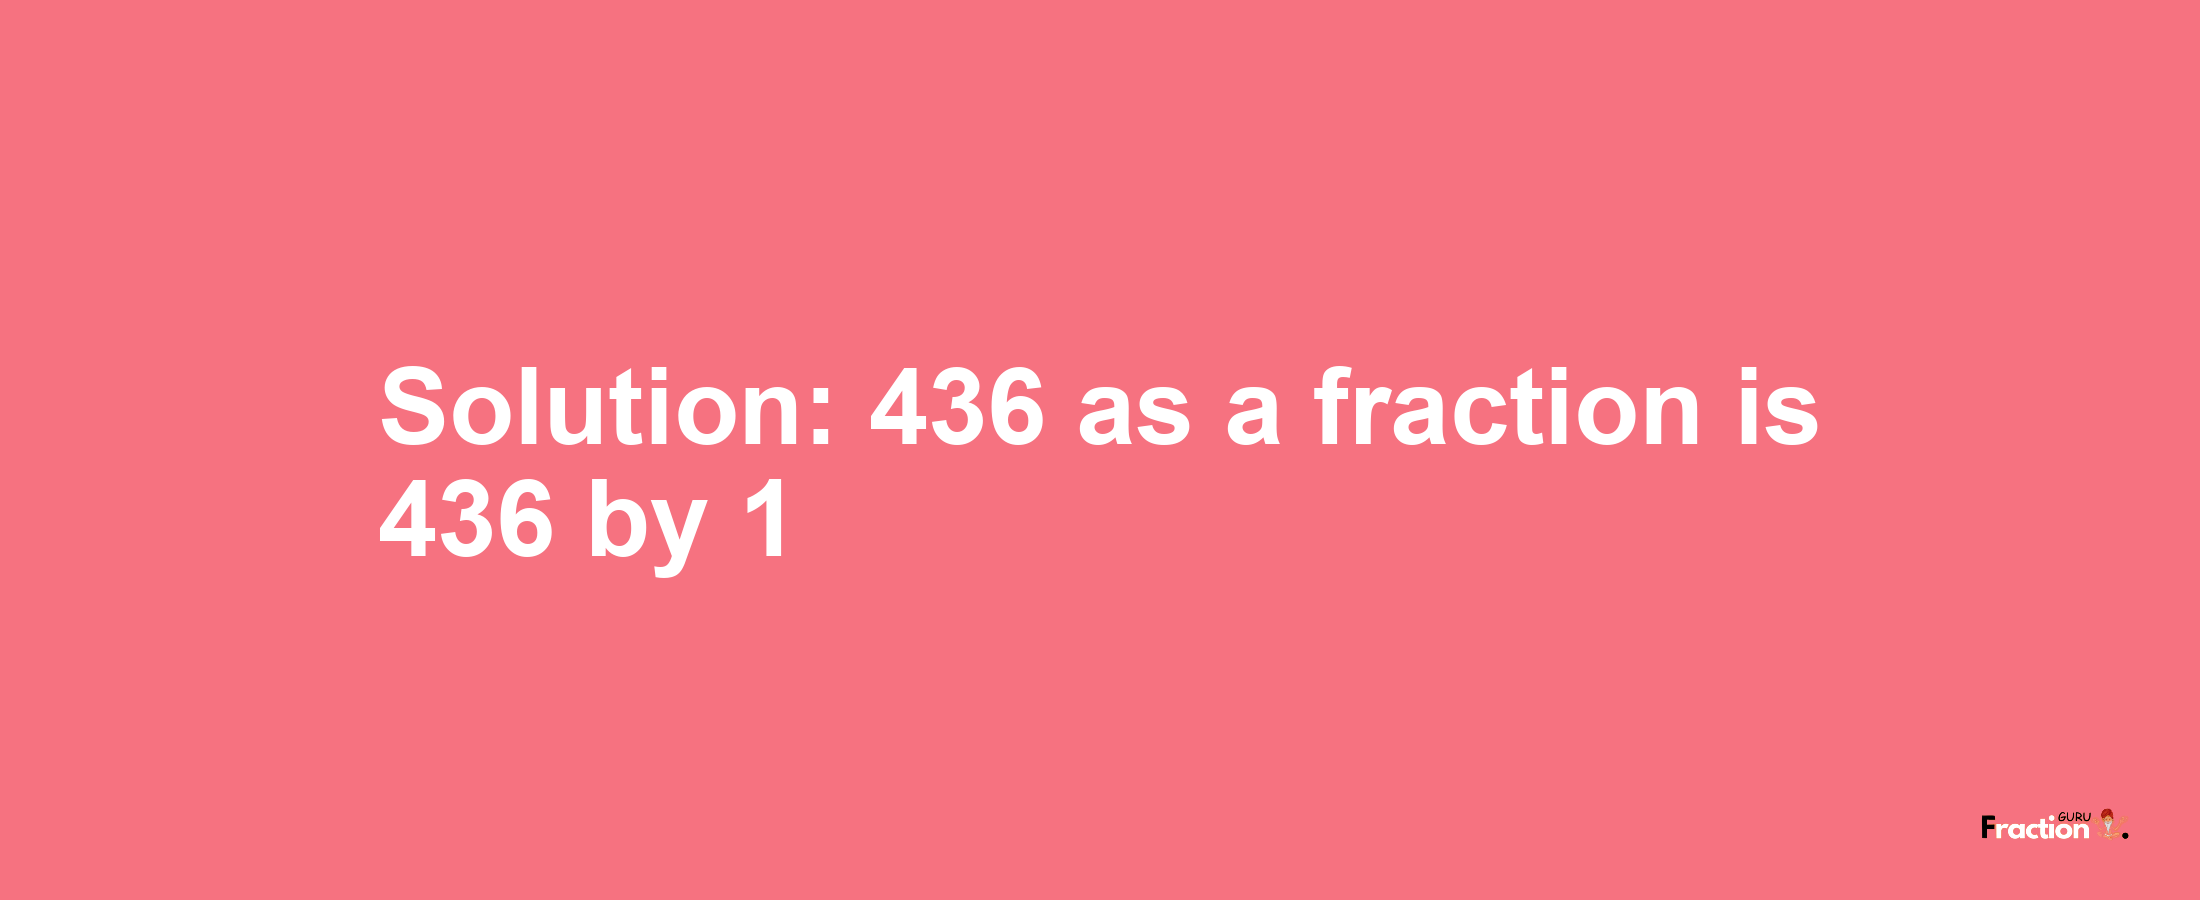 Solution:436 as a fraction is 436/1